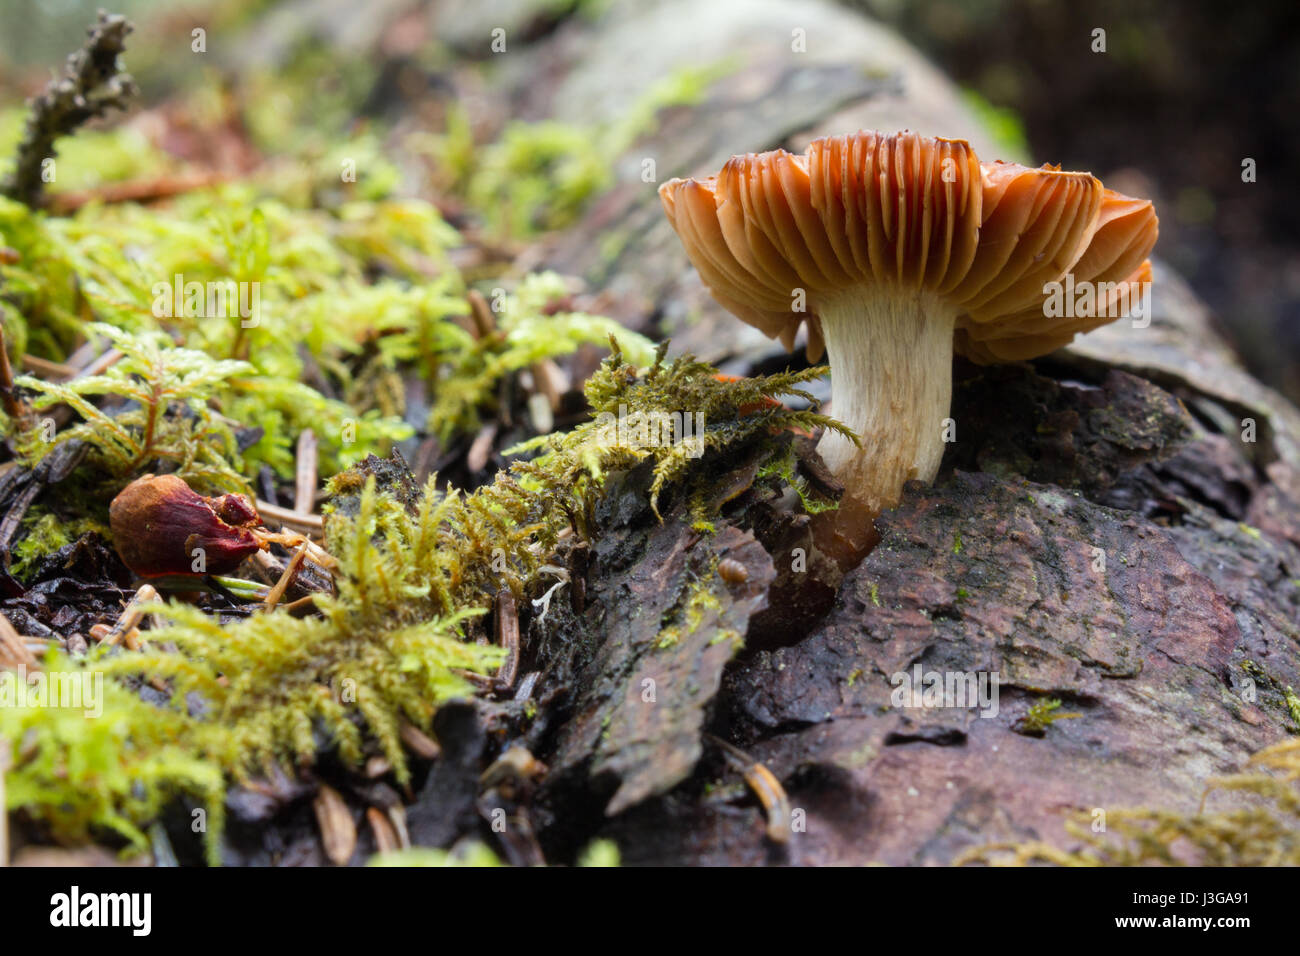 A brown-capped gilled mushroom in the Alberta Foothills. Stock Photo